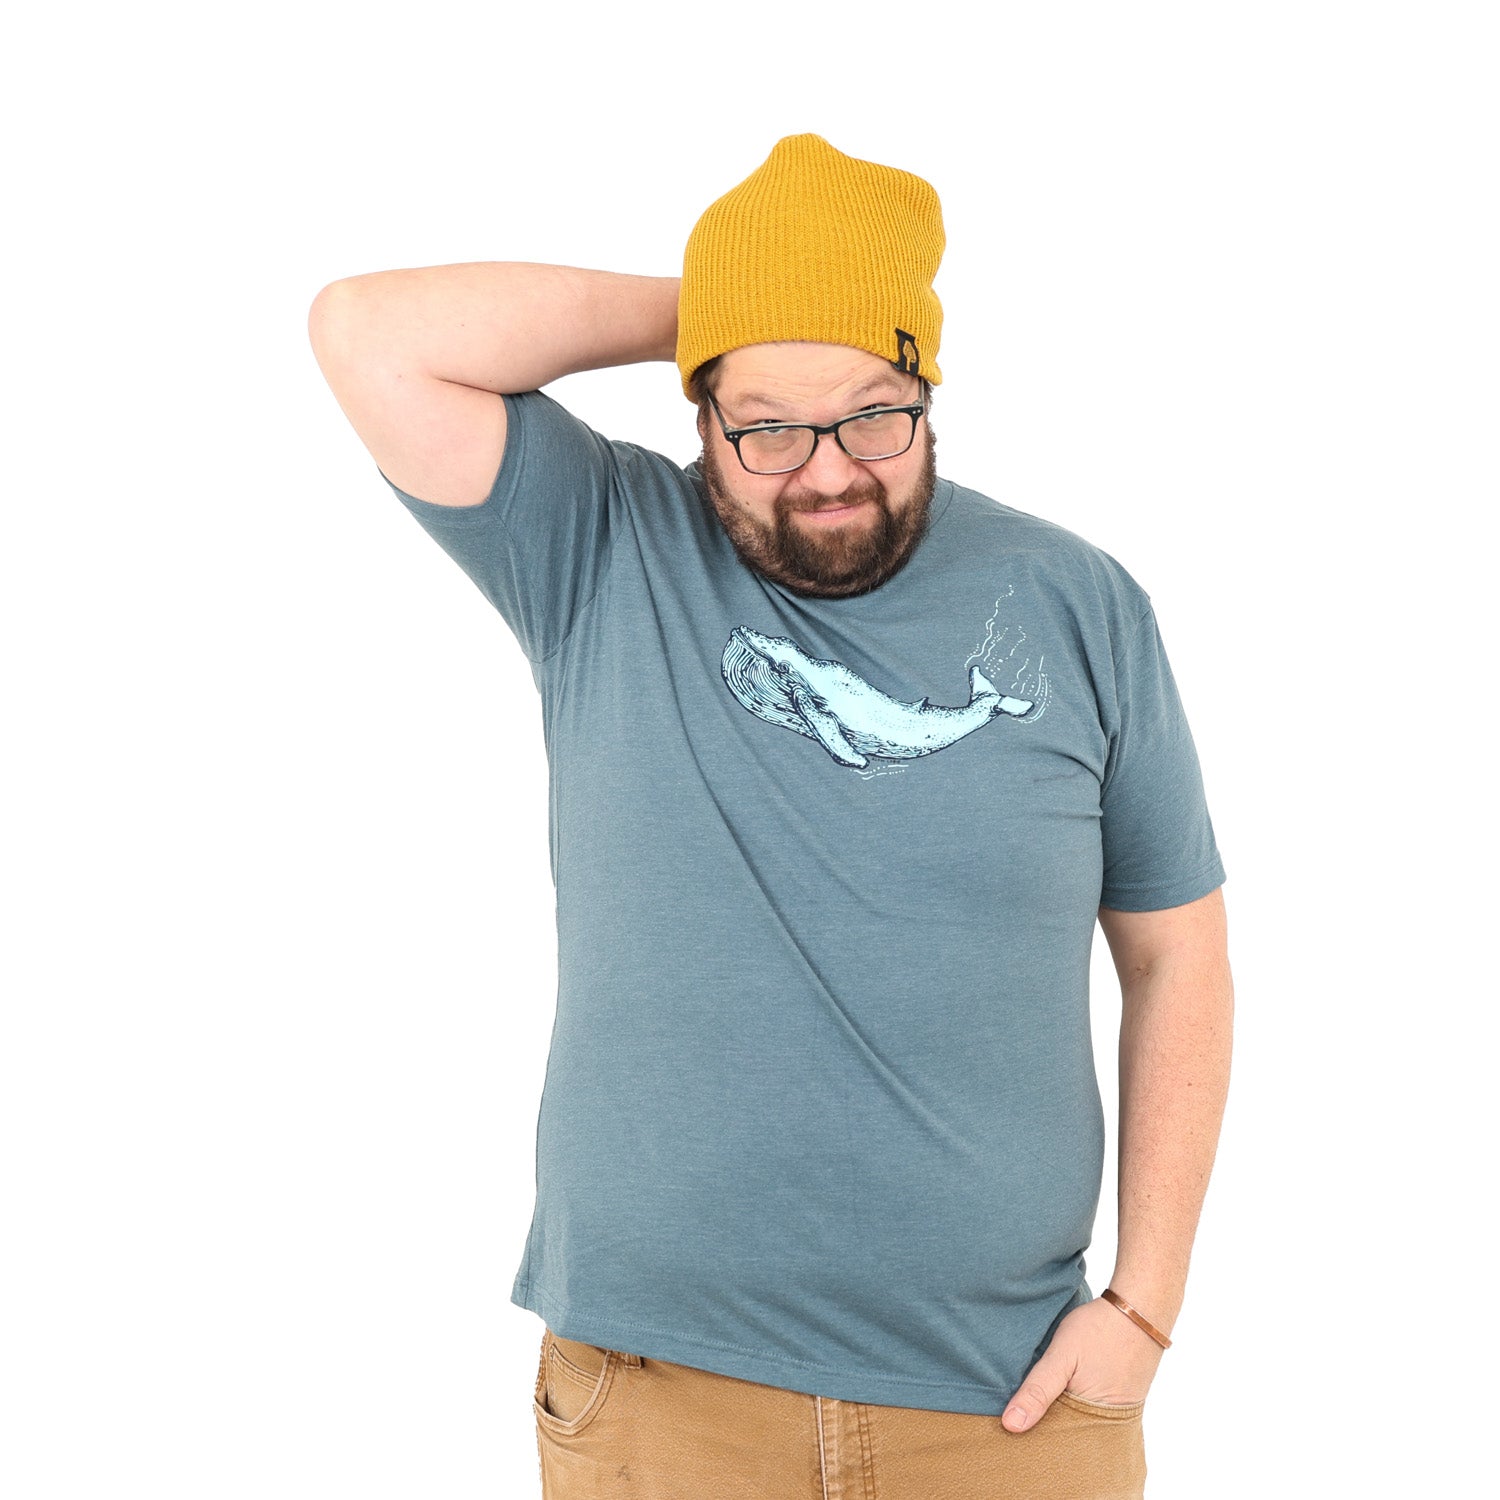 Man wearing glasses, a mustard benie and a blue/grey shirt that has a blue whale screen printed on it. 